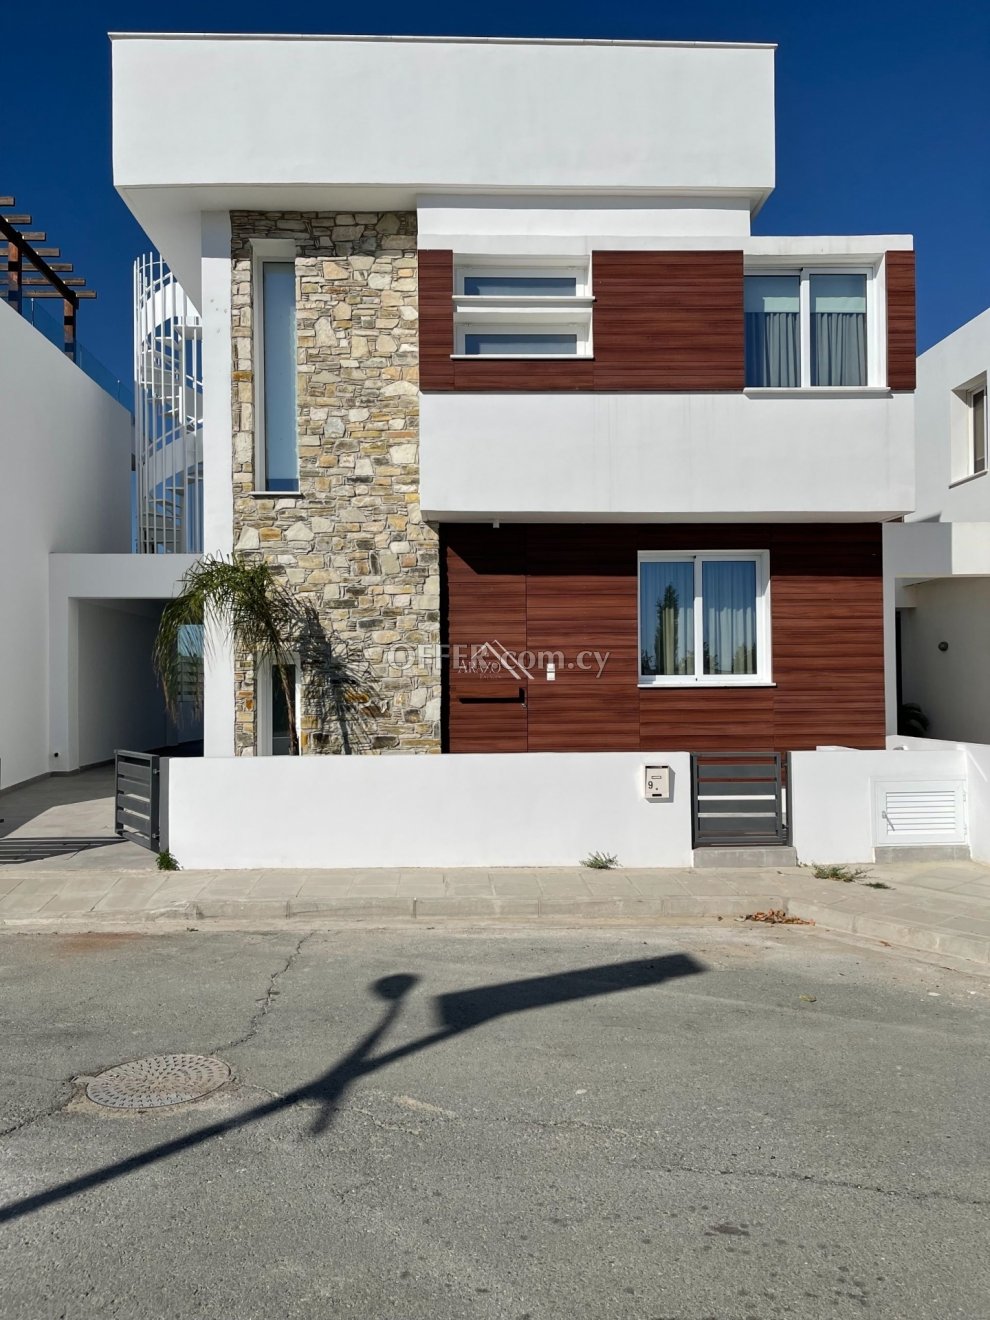 4 Bed House For Sale in Dromolaxia, Larnaca - 1